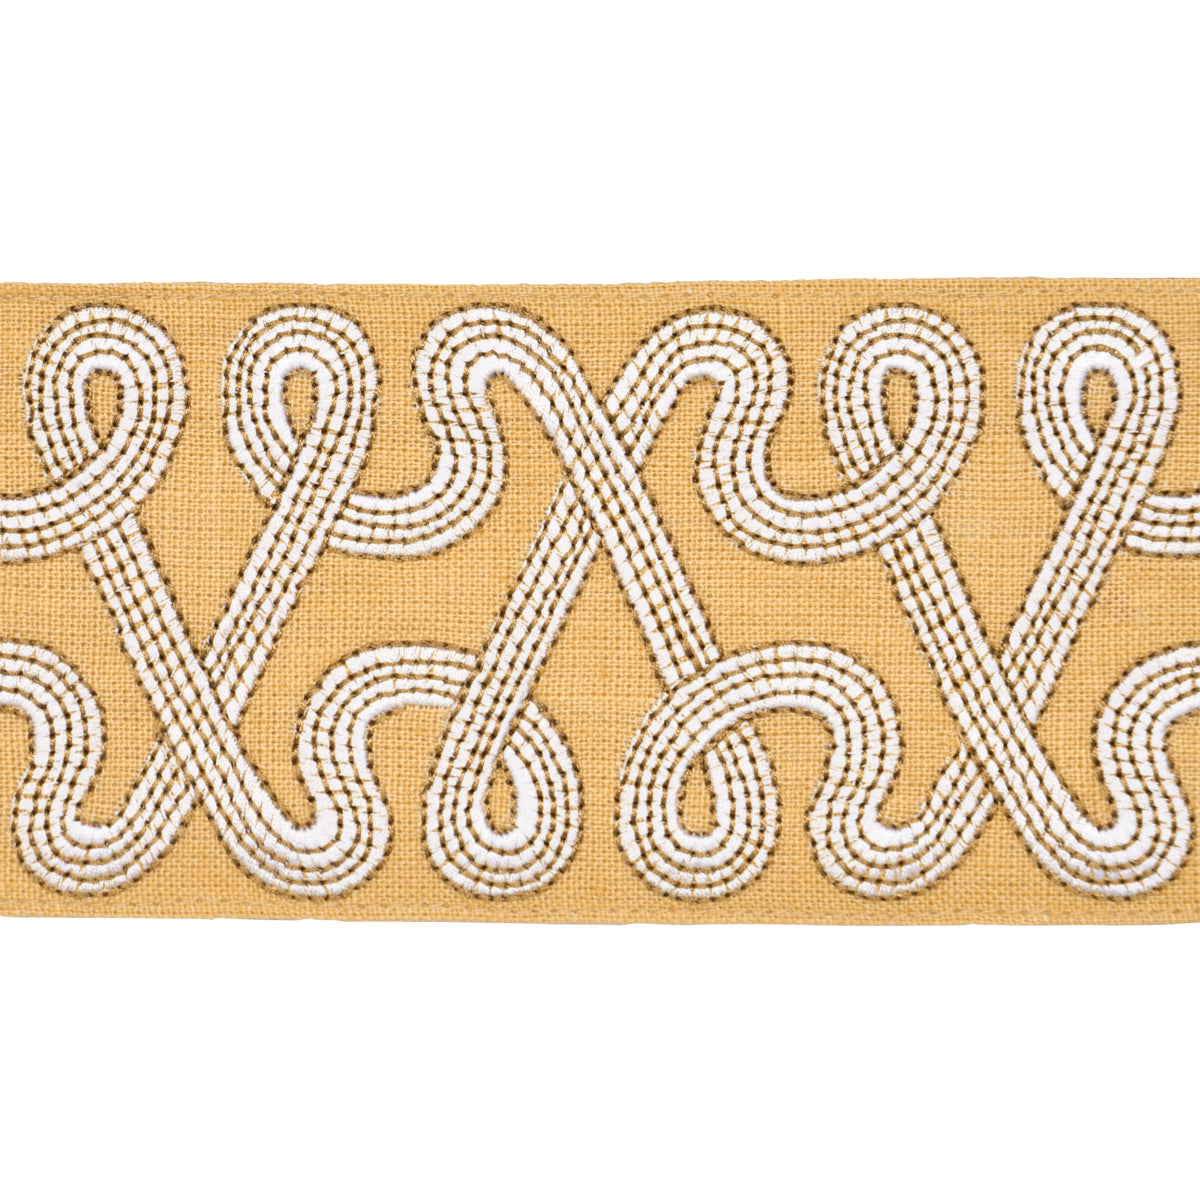 FREEFORM EMBROIDERED TAPE | MAIZE